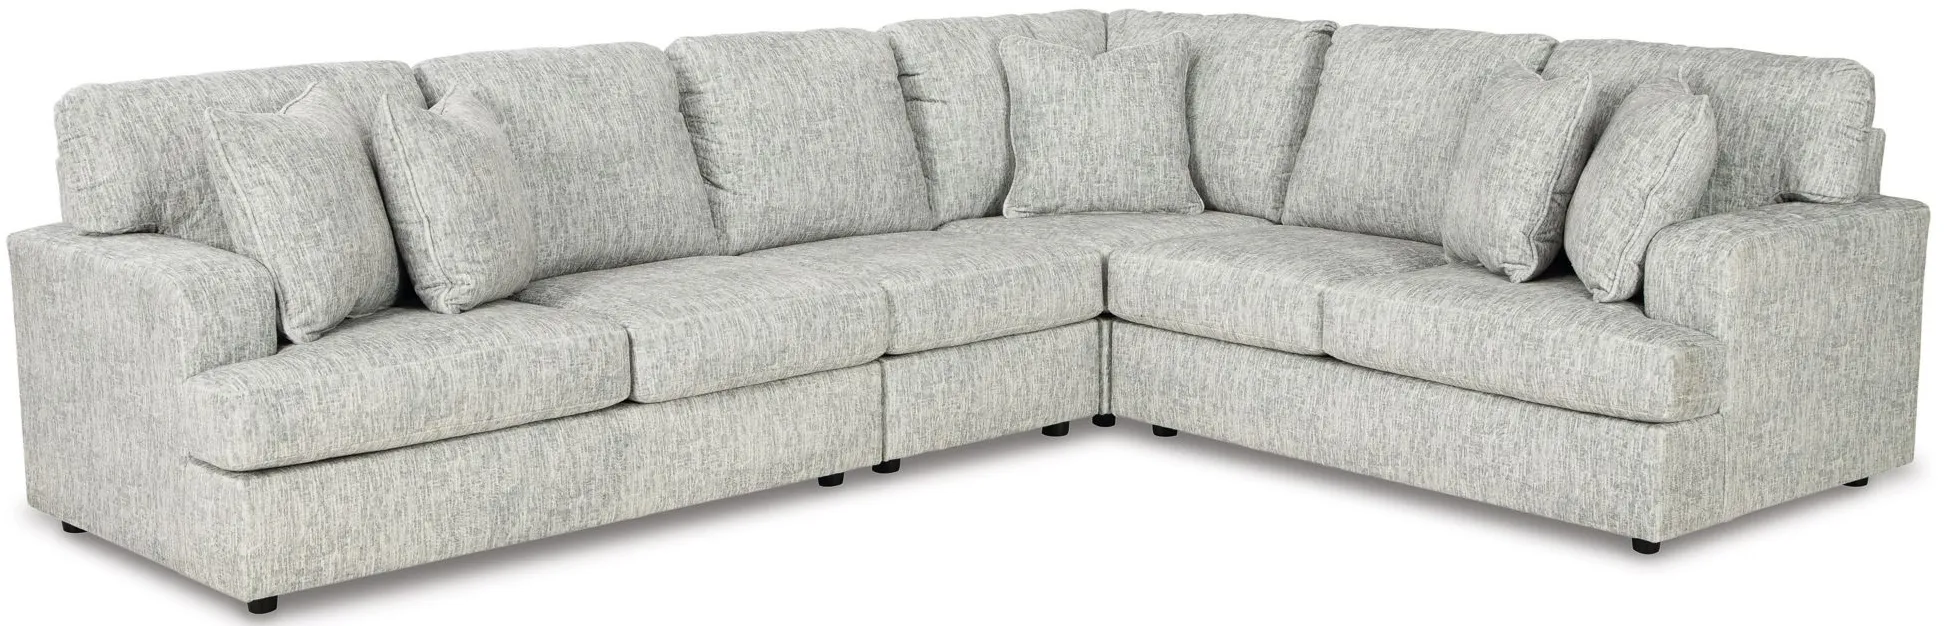 Playwrite 4-pc. Sectional in Gray by Ashley Furniture